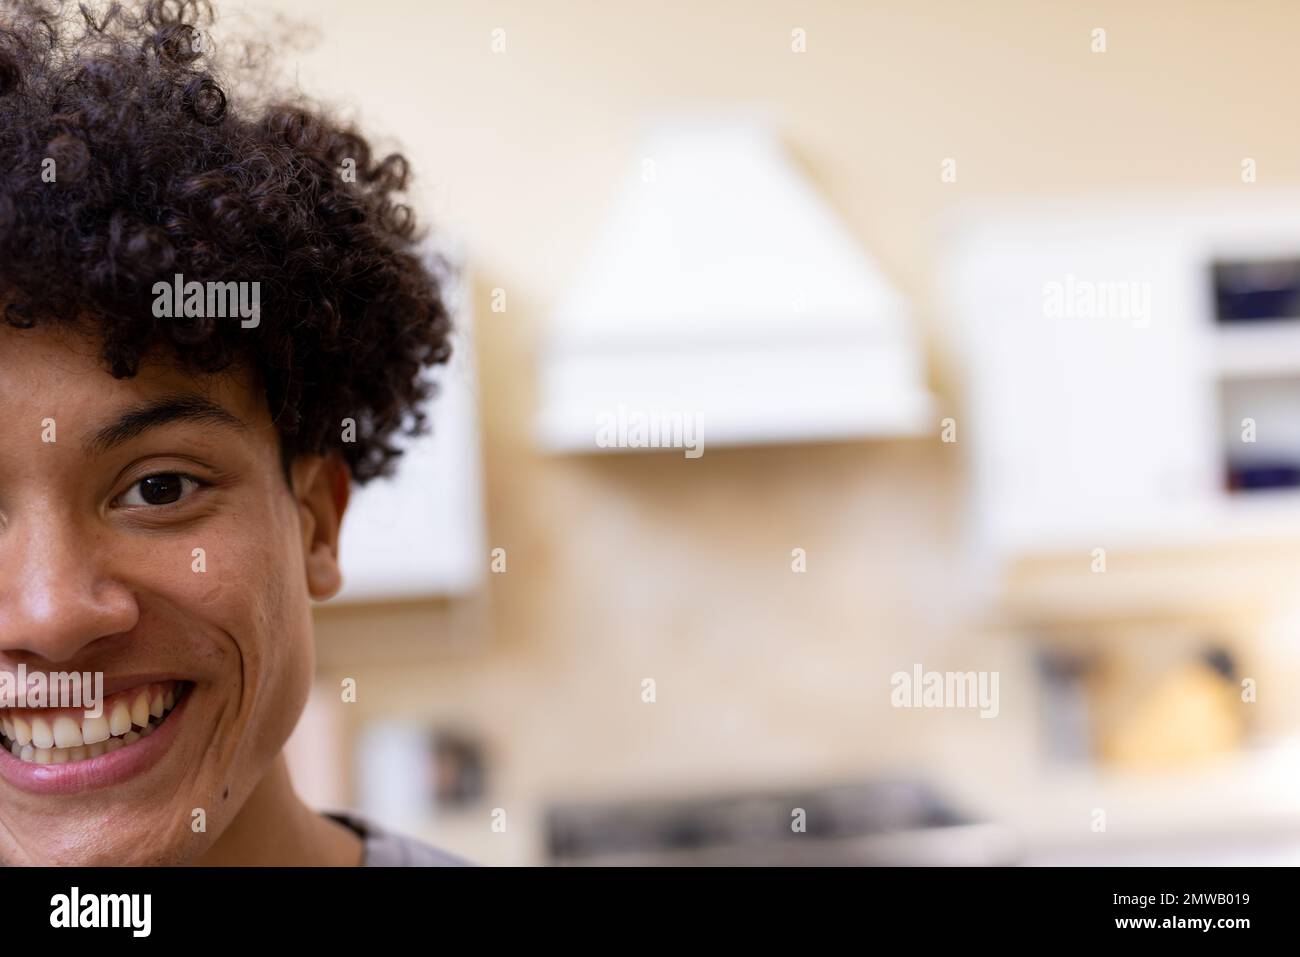 Half face portrait of smiling biracial man with curly hair in kitchen at home, copy space Stock Photo